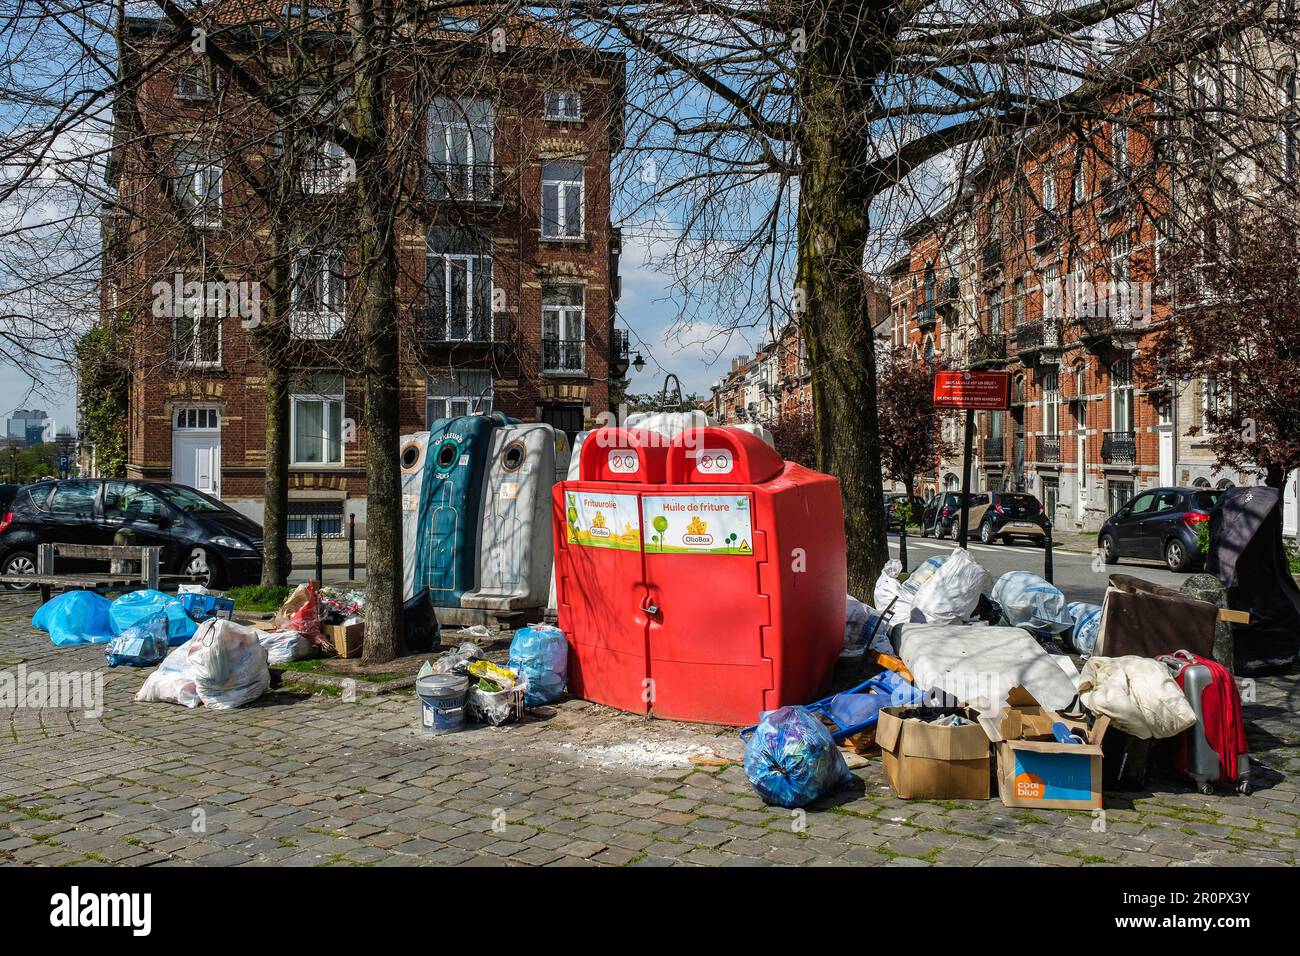 Unauthorized waste and trashes dump in the middle of a square and around the glass bootle bin and oil bin | Depôt clandestin de detritus, poubelles et Stock Photo